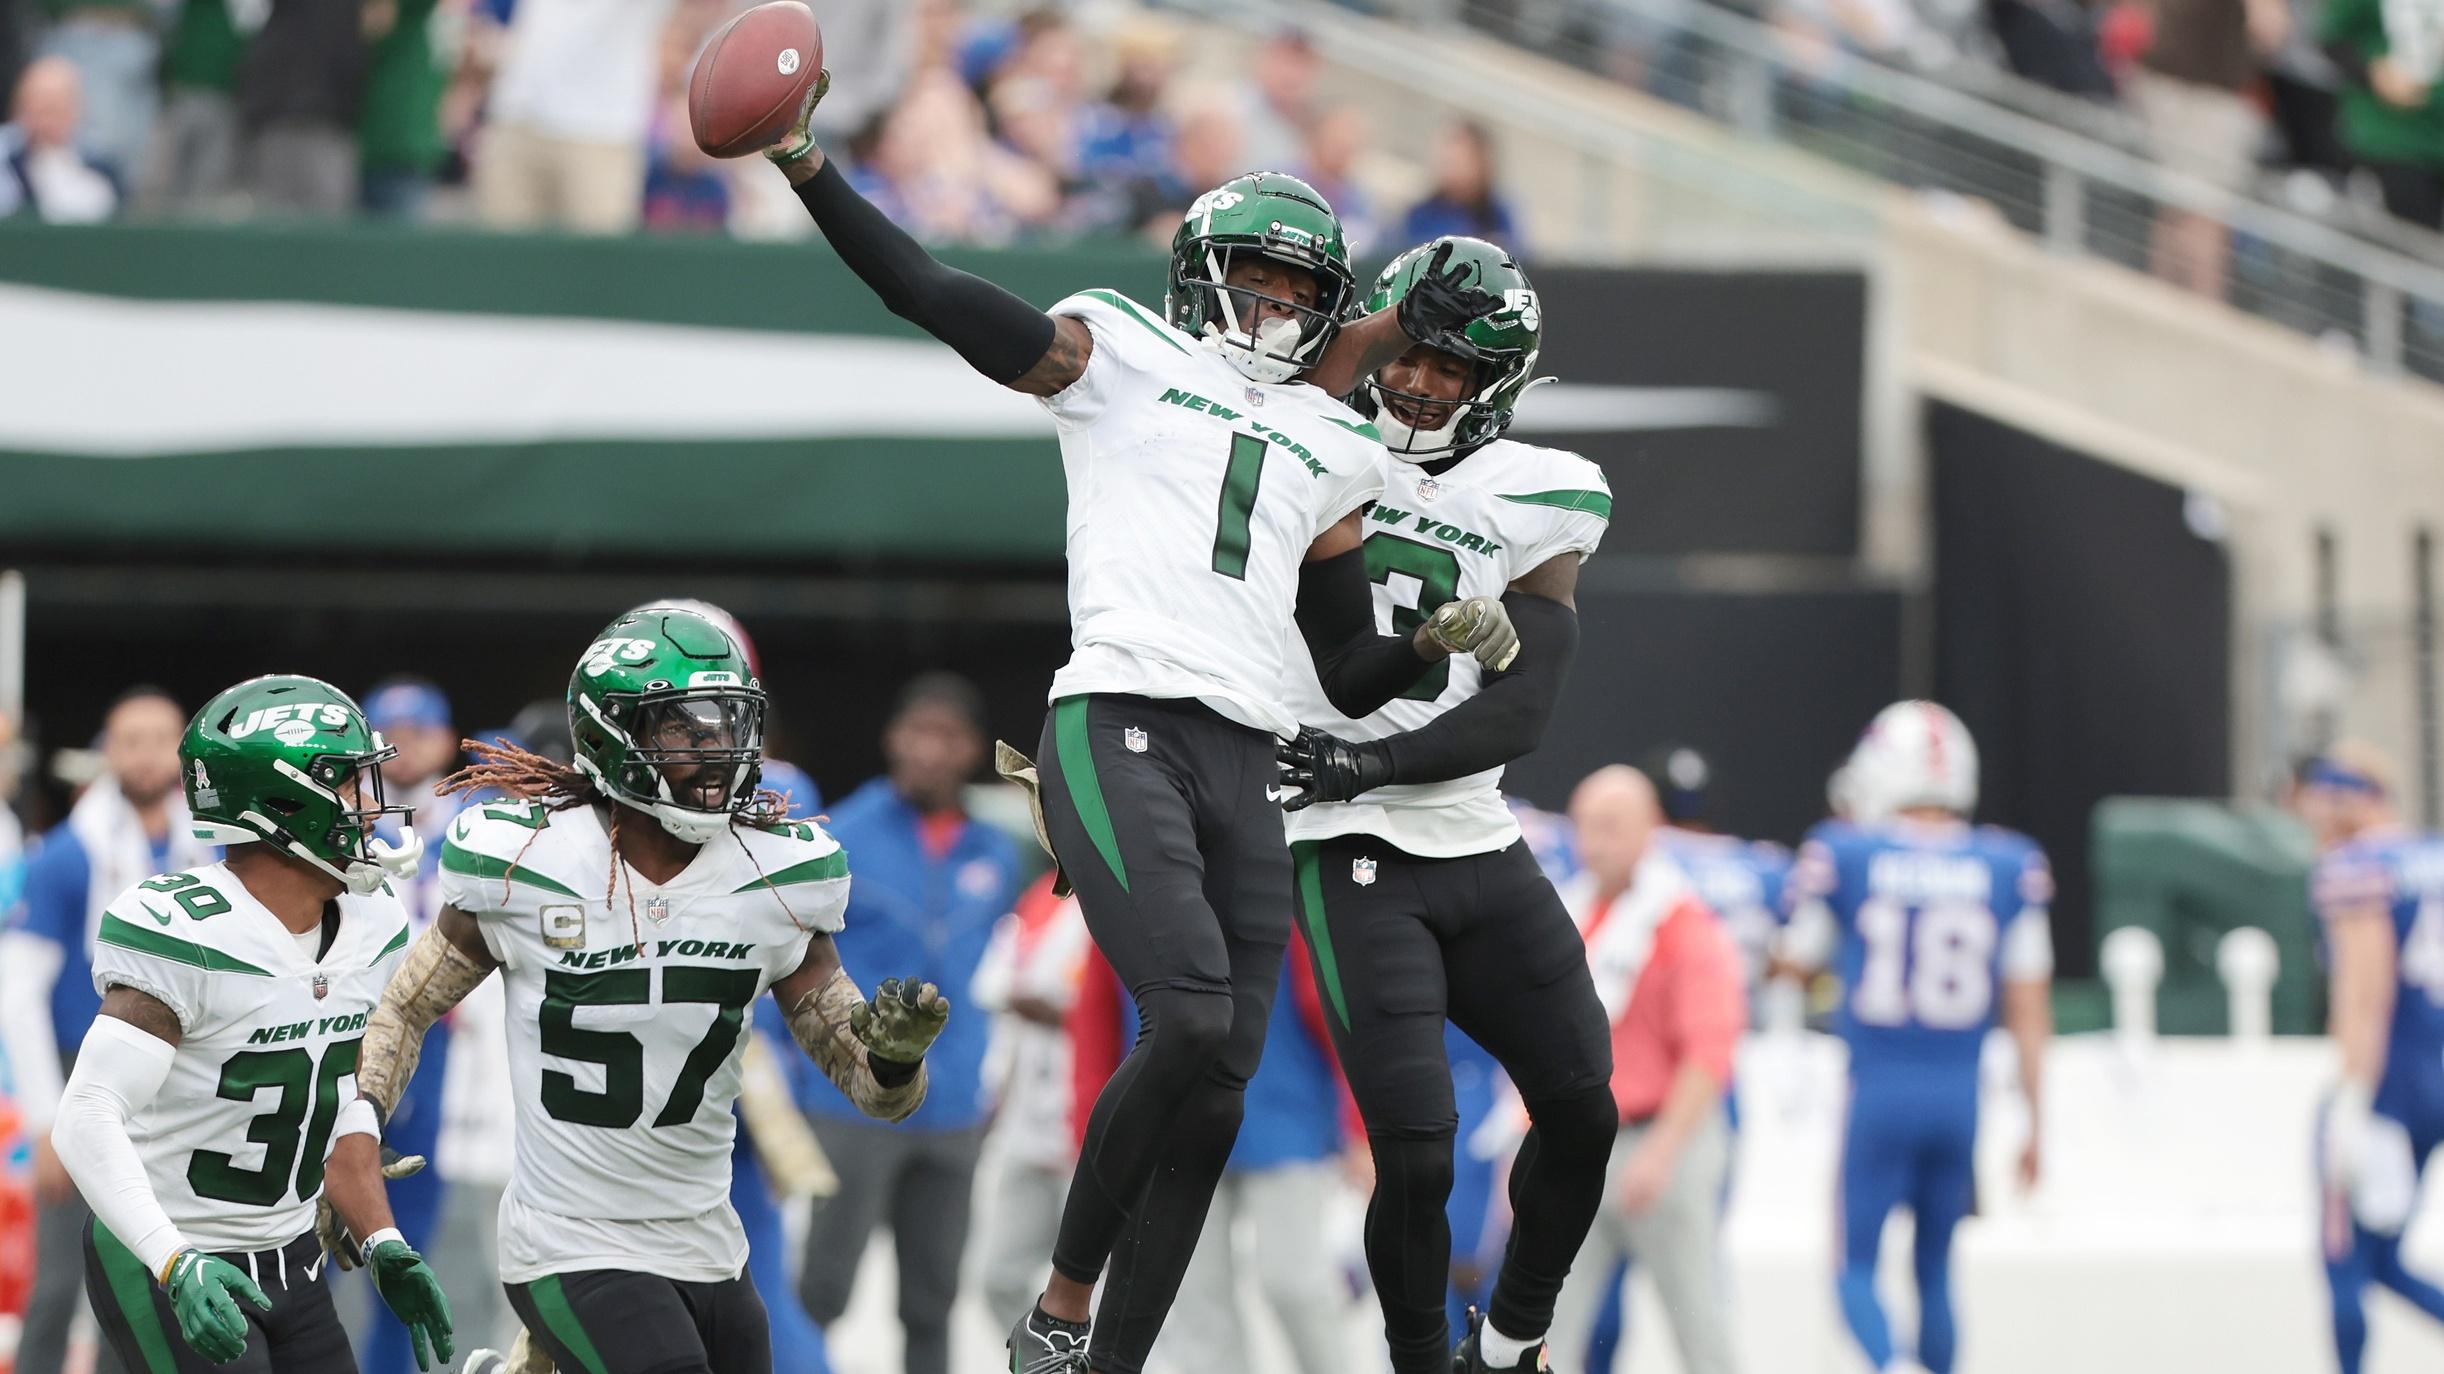 Nov 6, 2022; East Rutherford, New Jersey, USA; New York Jets cornerback Sauce Gardner (1) celebrates his interception with teammates during the second half against the Buffalo Bills at MetLife Stadium. / Vincent Carchietta-USA TODAY Sports